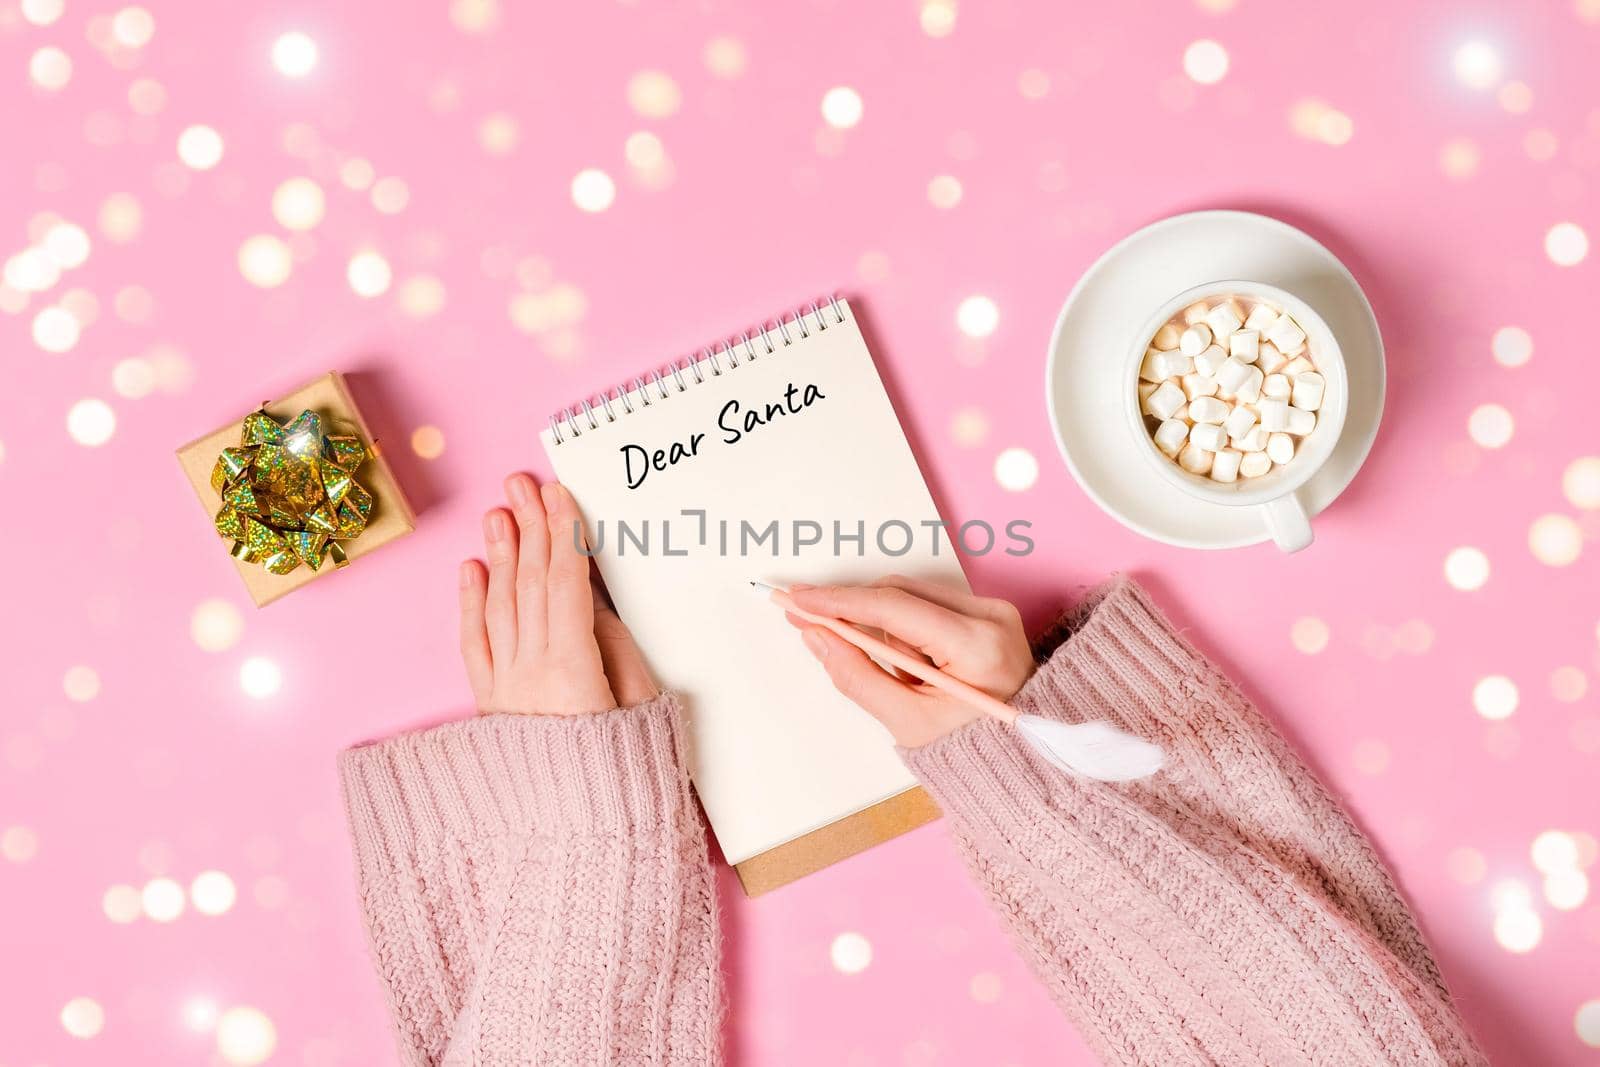 Letter to Dear Santa. Hand holding pink pen decorated with feather and writing in Notepad letter to Santa Claus on pink background with cup of hot chocolate with marshmallows, a gift, golden tinsel.